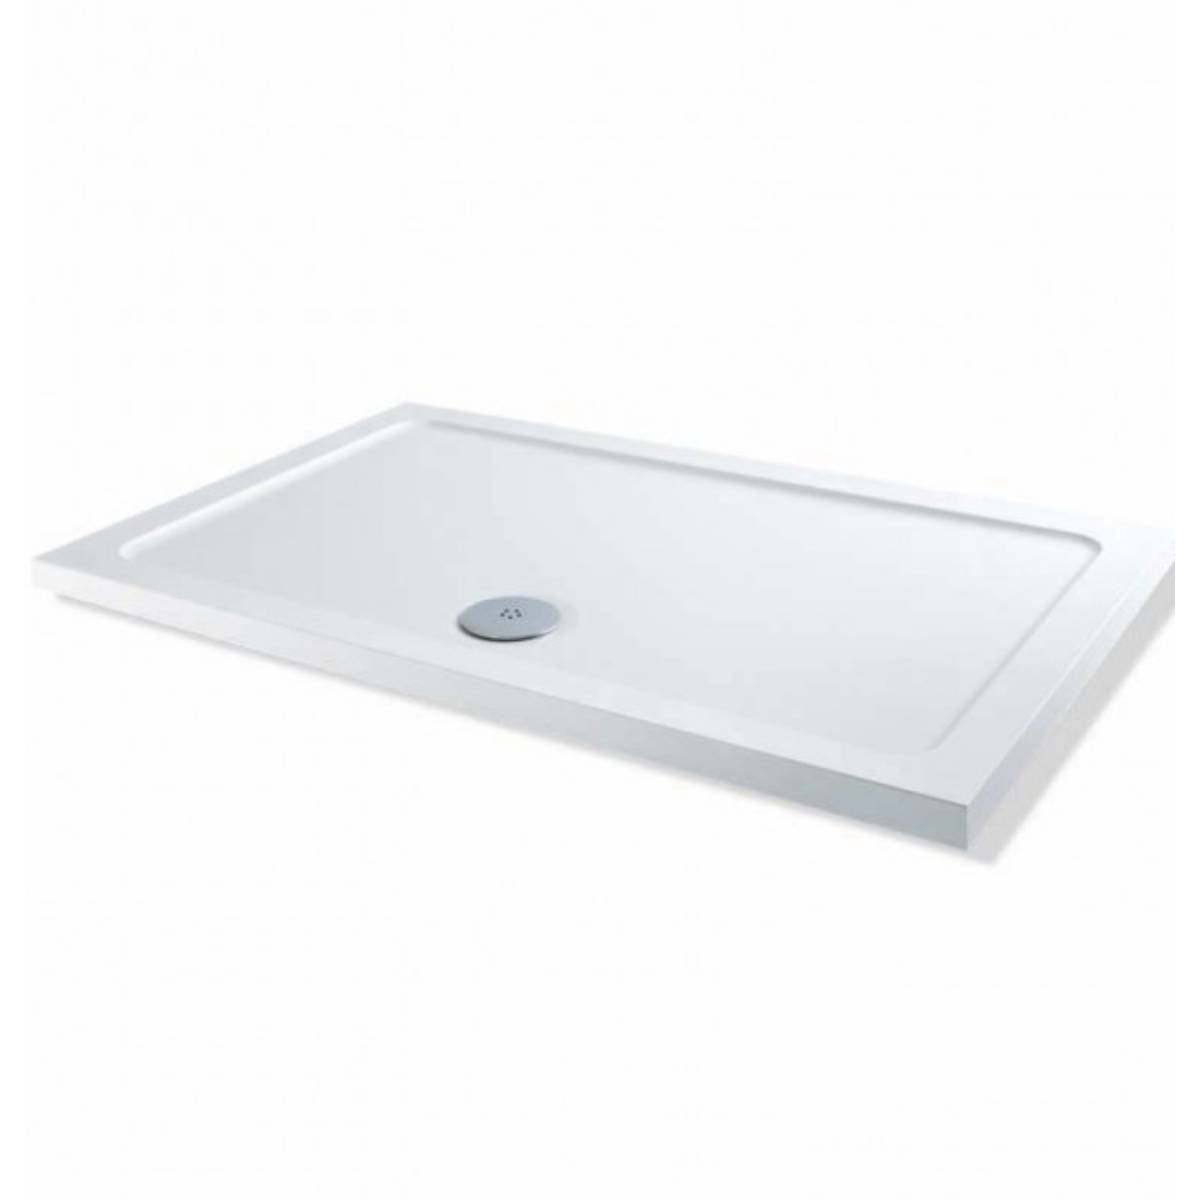 Rectangular 1500x700mm Stone Shower Enclosure Tray NEXT WORKING DAY DELIVERY 